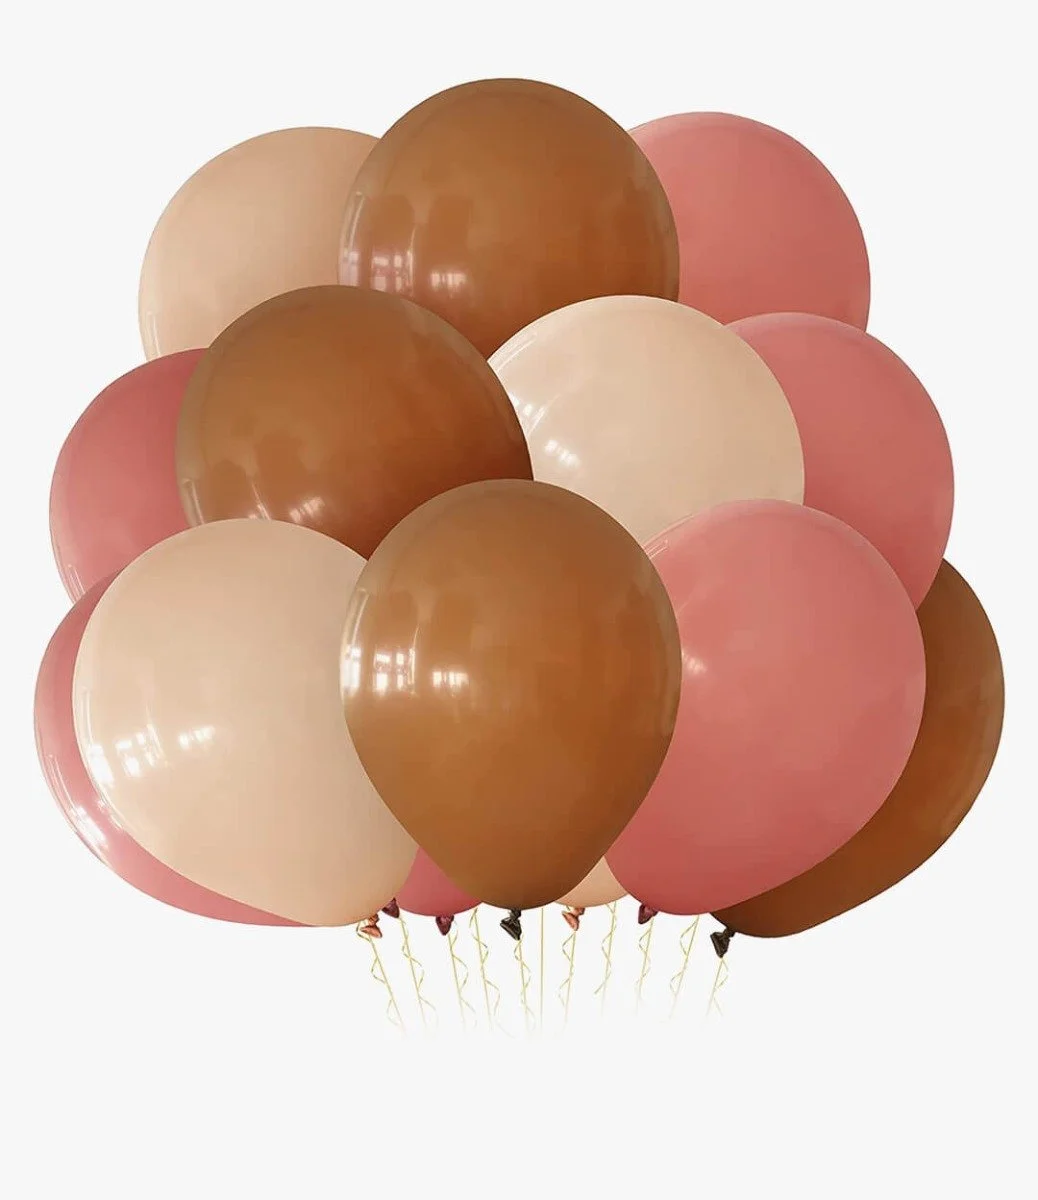 12 inches Cream, Brown & Pink Latex Balloon Pack of 12pcs